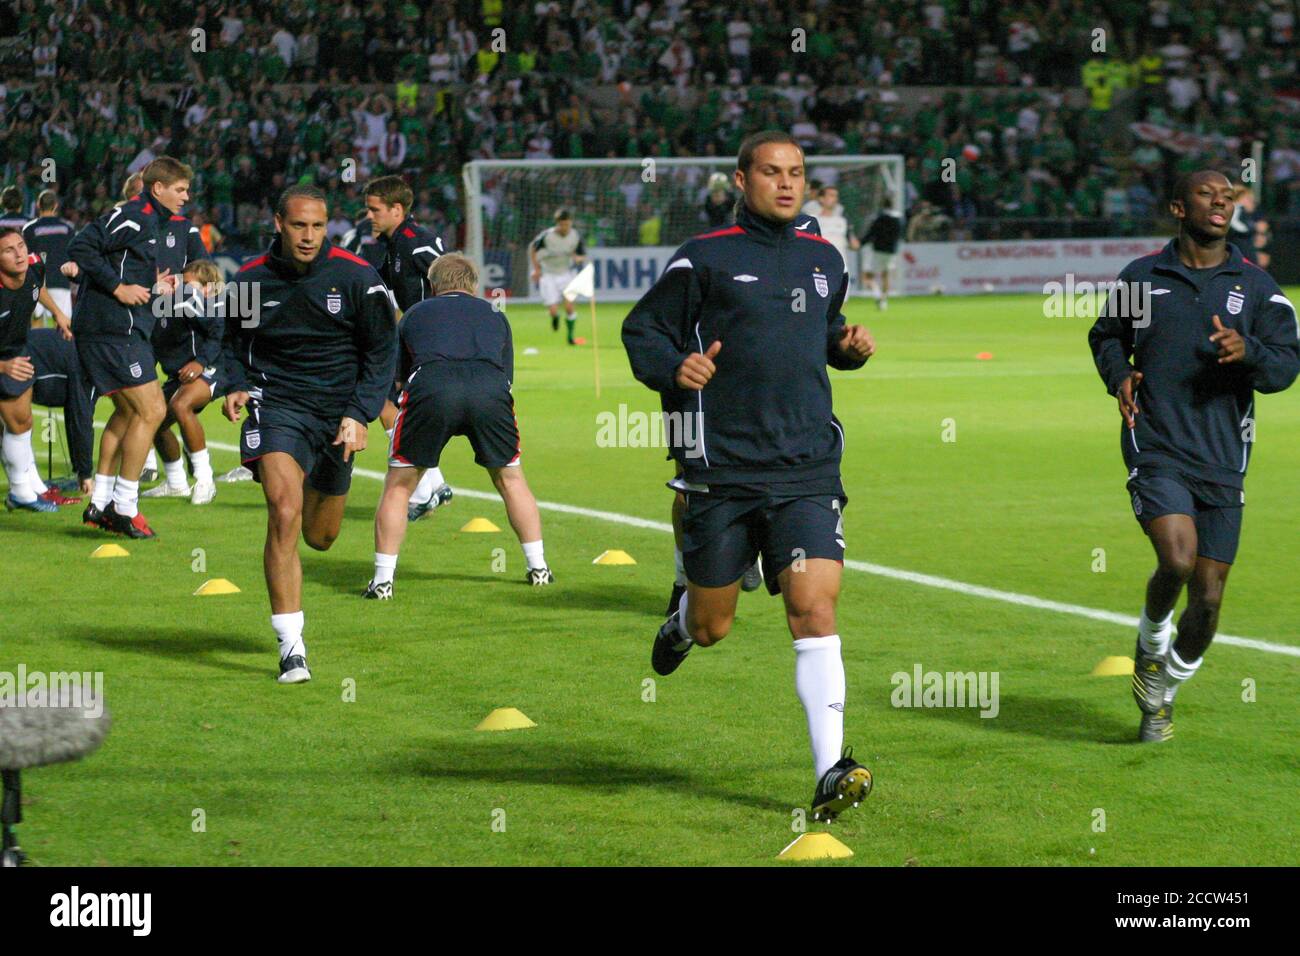 07 September 2005. Windsor Park, Belfast, Northern Ireland. International football – 2006 FIFA World Cup Group 6 Qualifier, Northern Ireland 1 England 0. Former England international footballer Luke Young training before the match in Belfast with Ashley Cole (right) and Rio Ferdinand behind him. Stock Photo